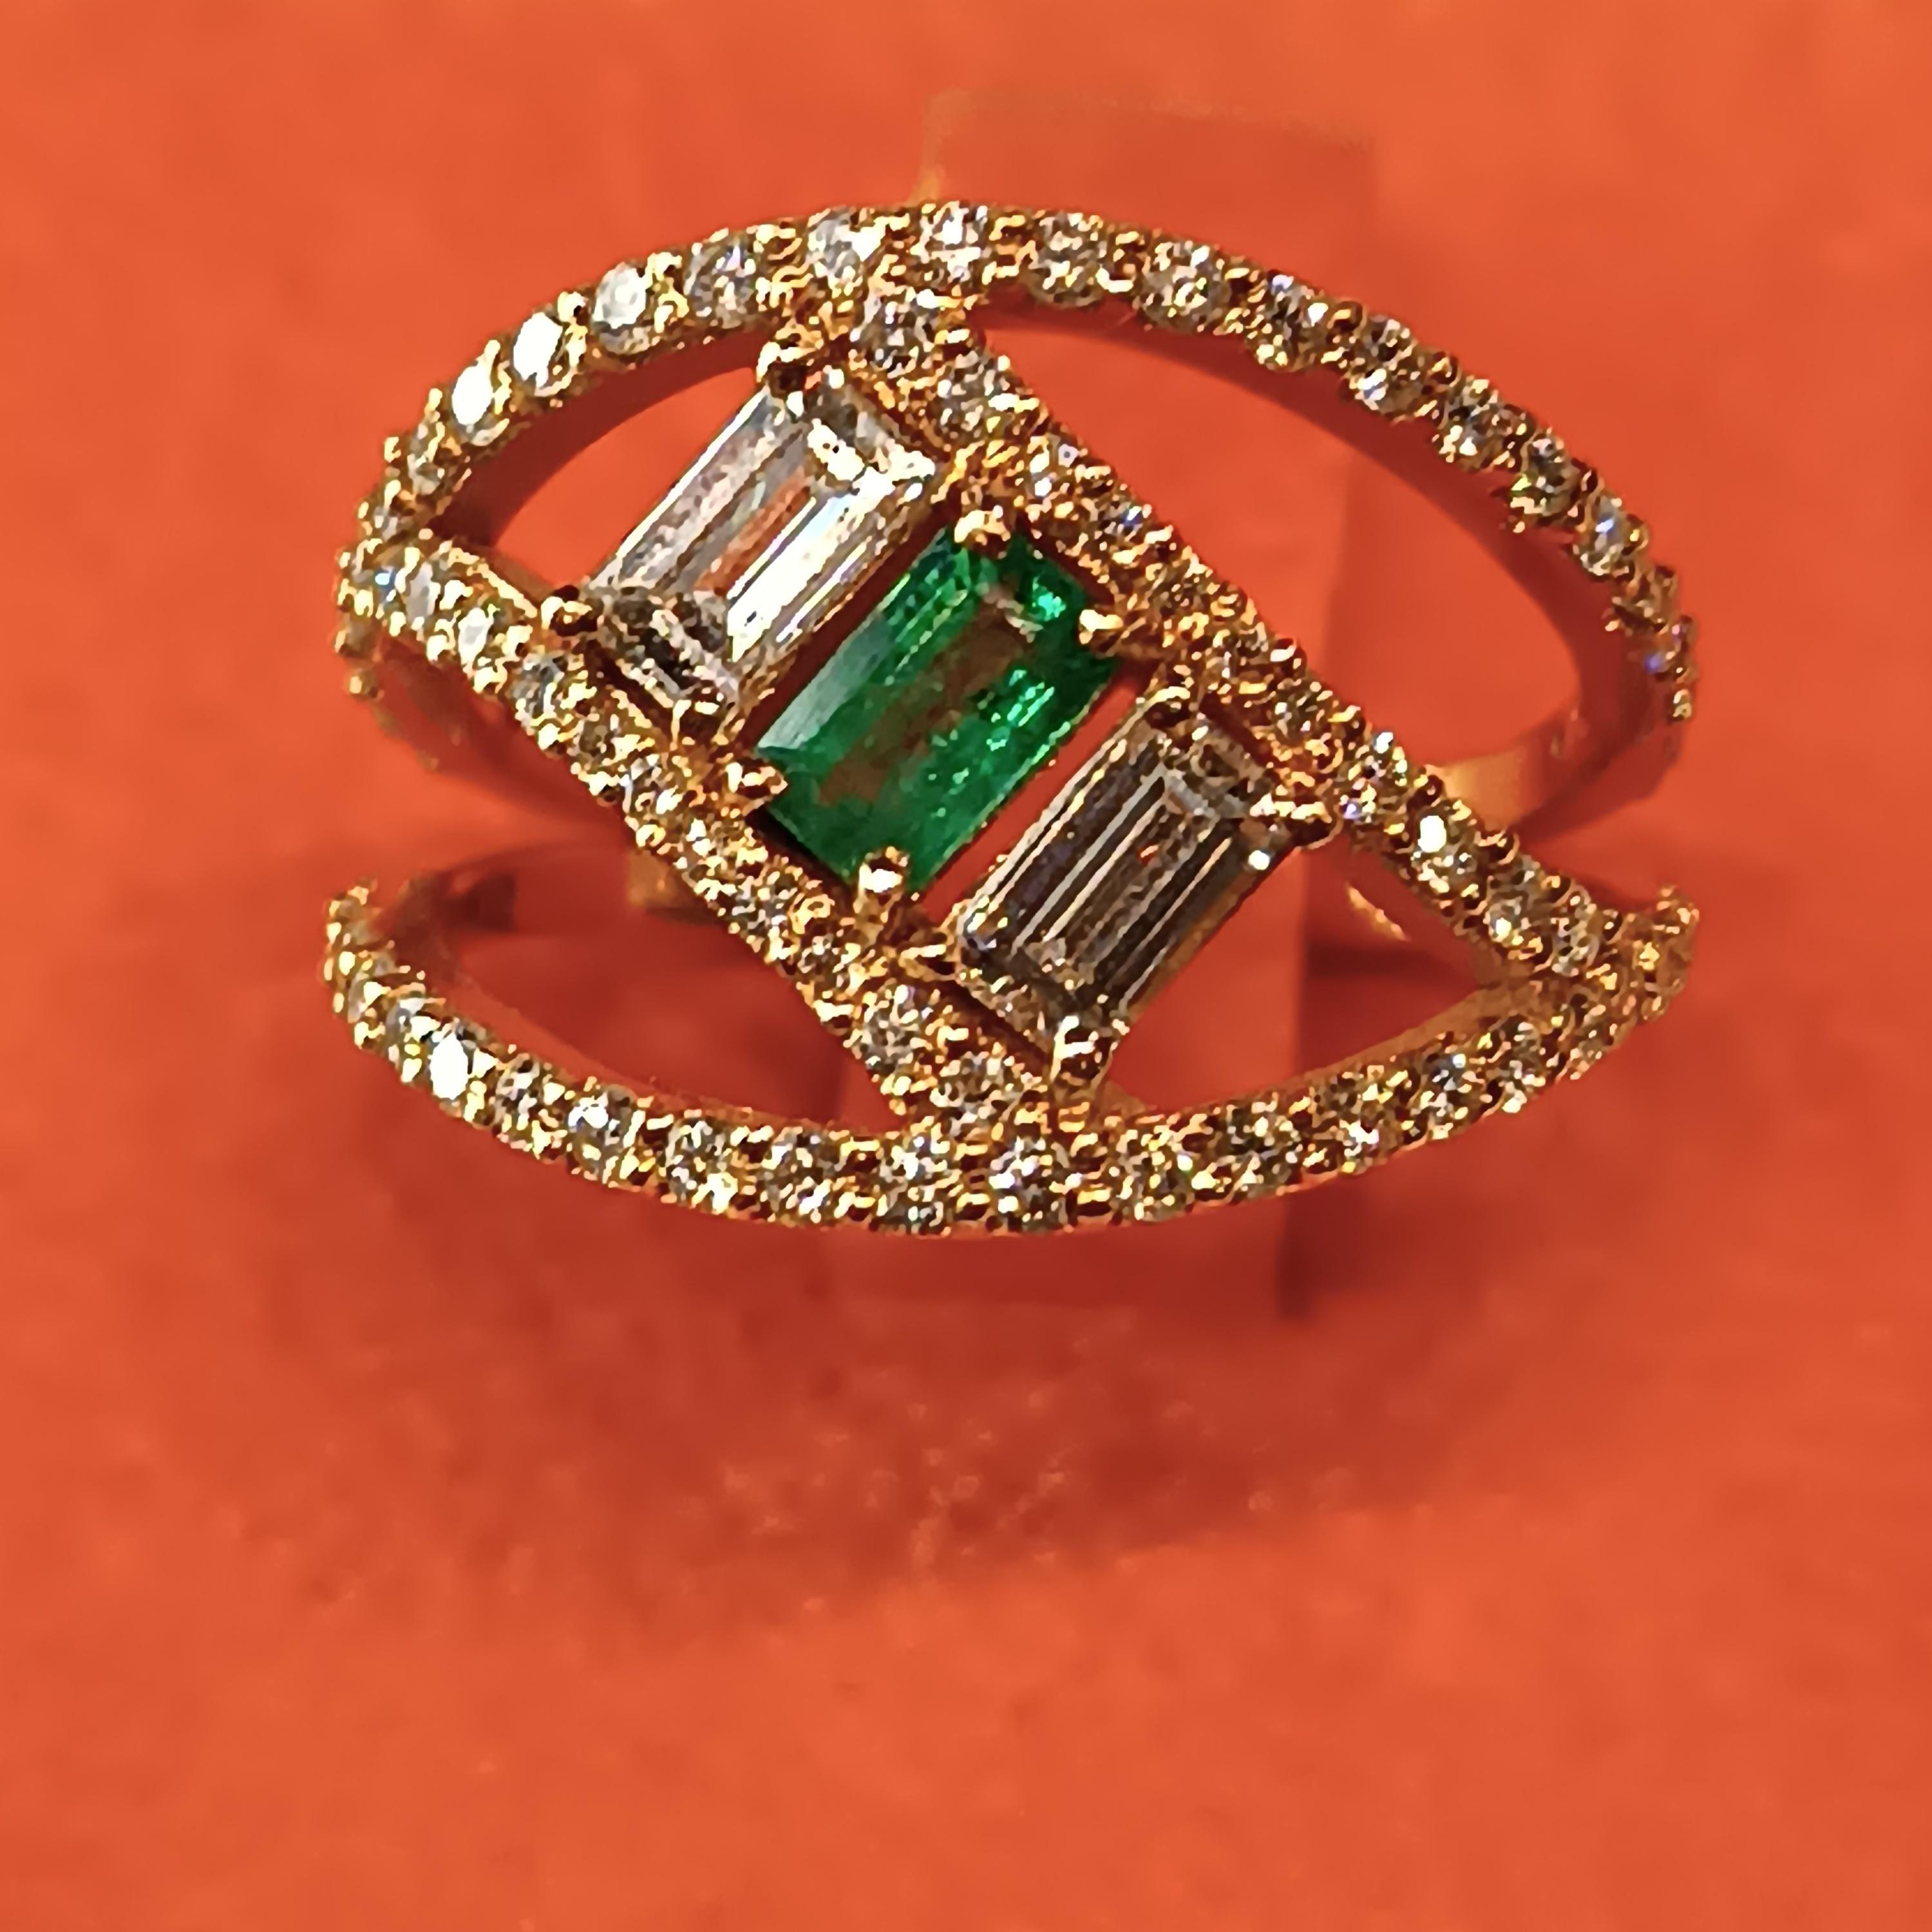 modern design 18 carat Rose gold ring with 0.54 Carats  VS G color 2 baguette cut diamond and 1 baguette cut emeralds of .03 carat each adorned with 64 diamonds for a total of .64 carats. total gross weight gr. 5.07 .Ring size 54
This ring designed